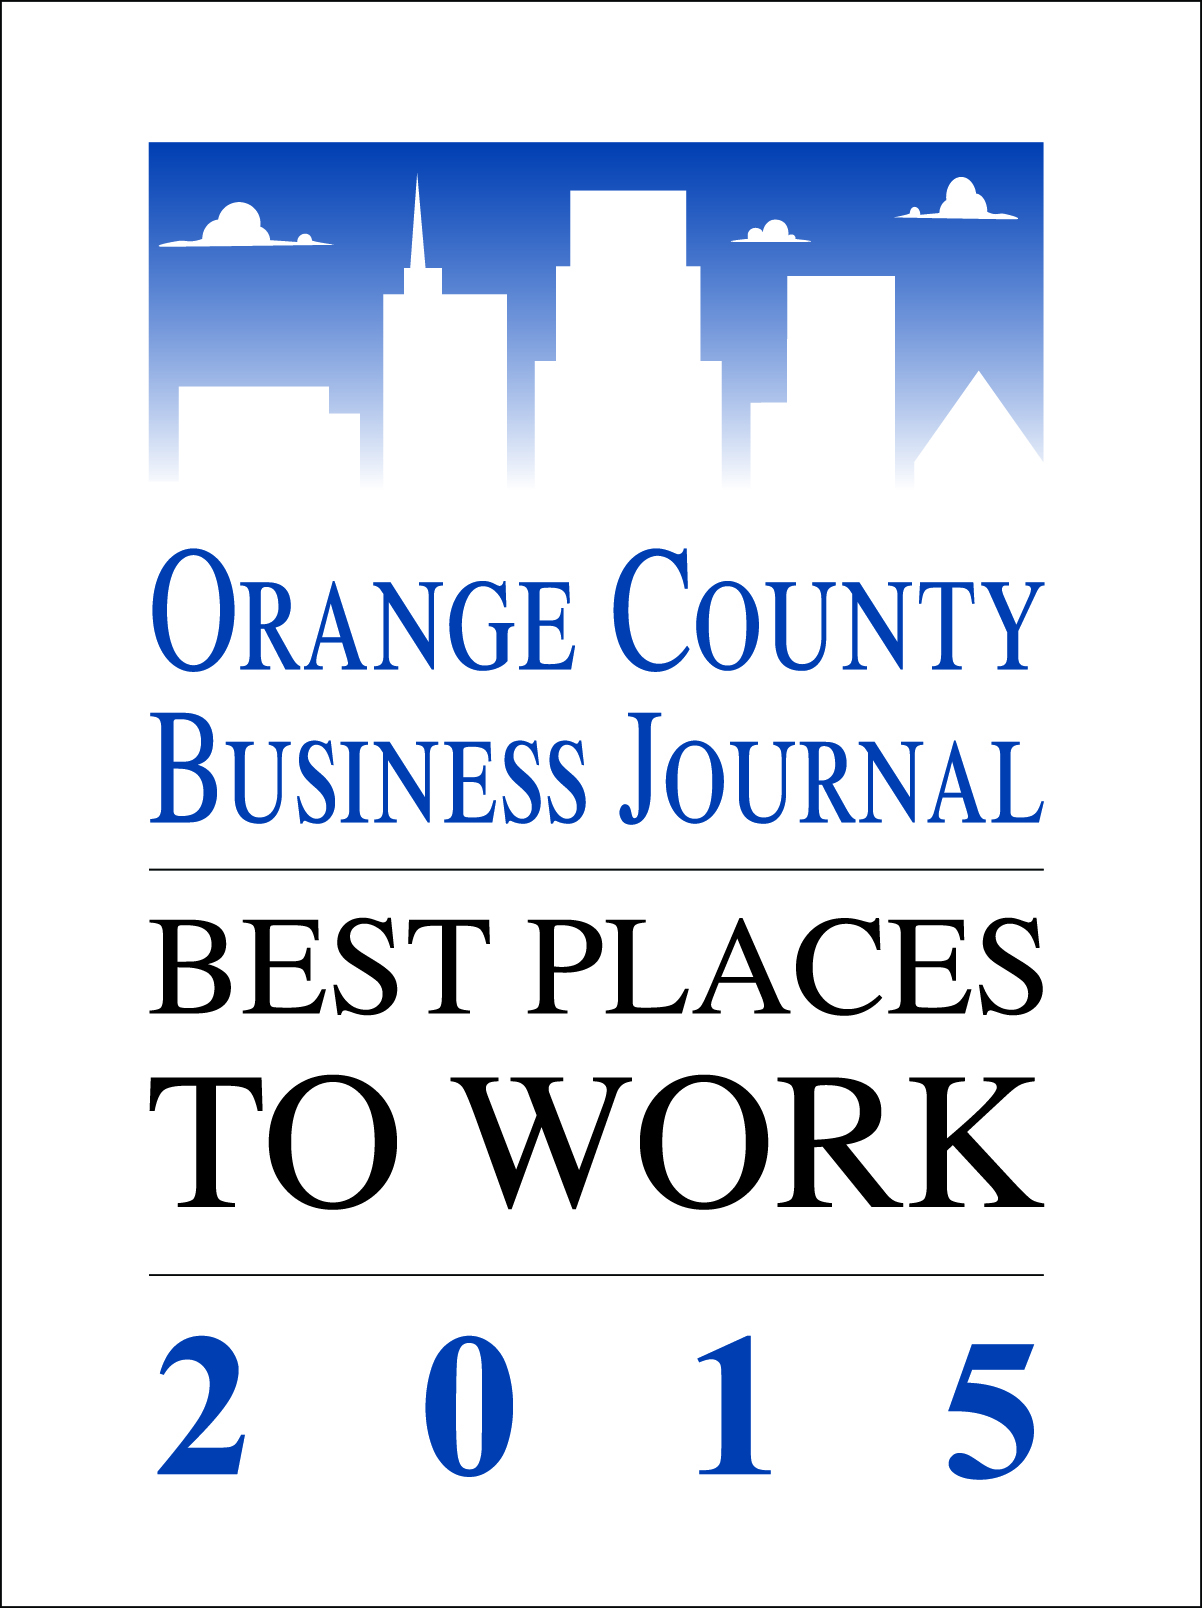 Fenix Consulting Group named Best Places to Work in 2015